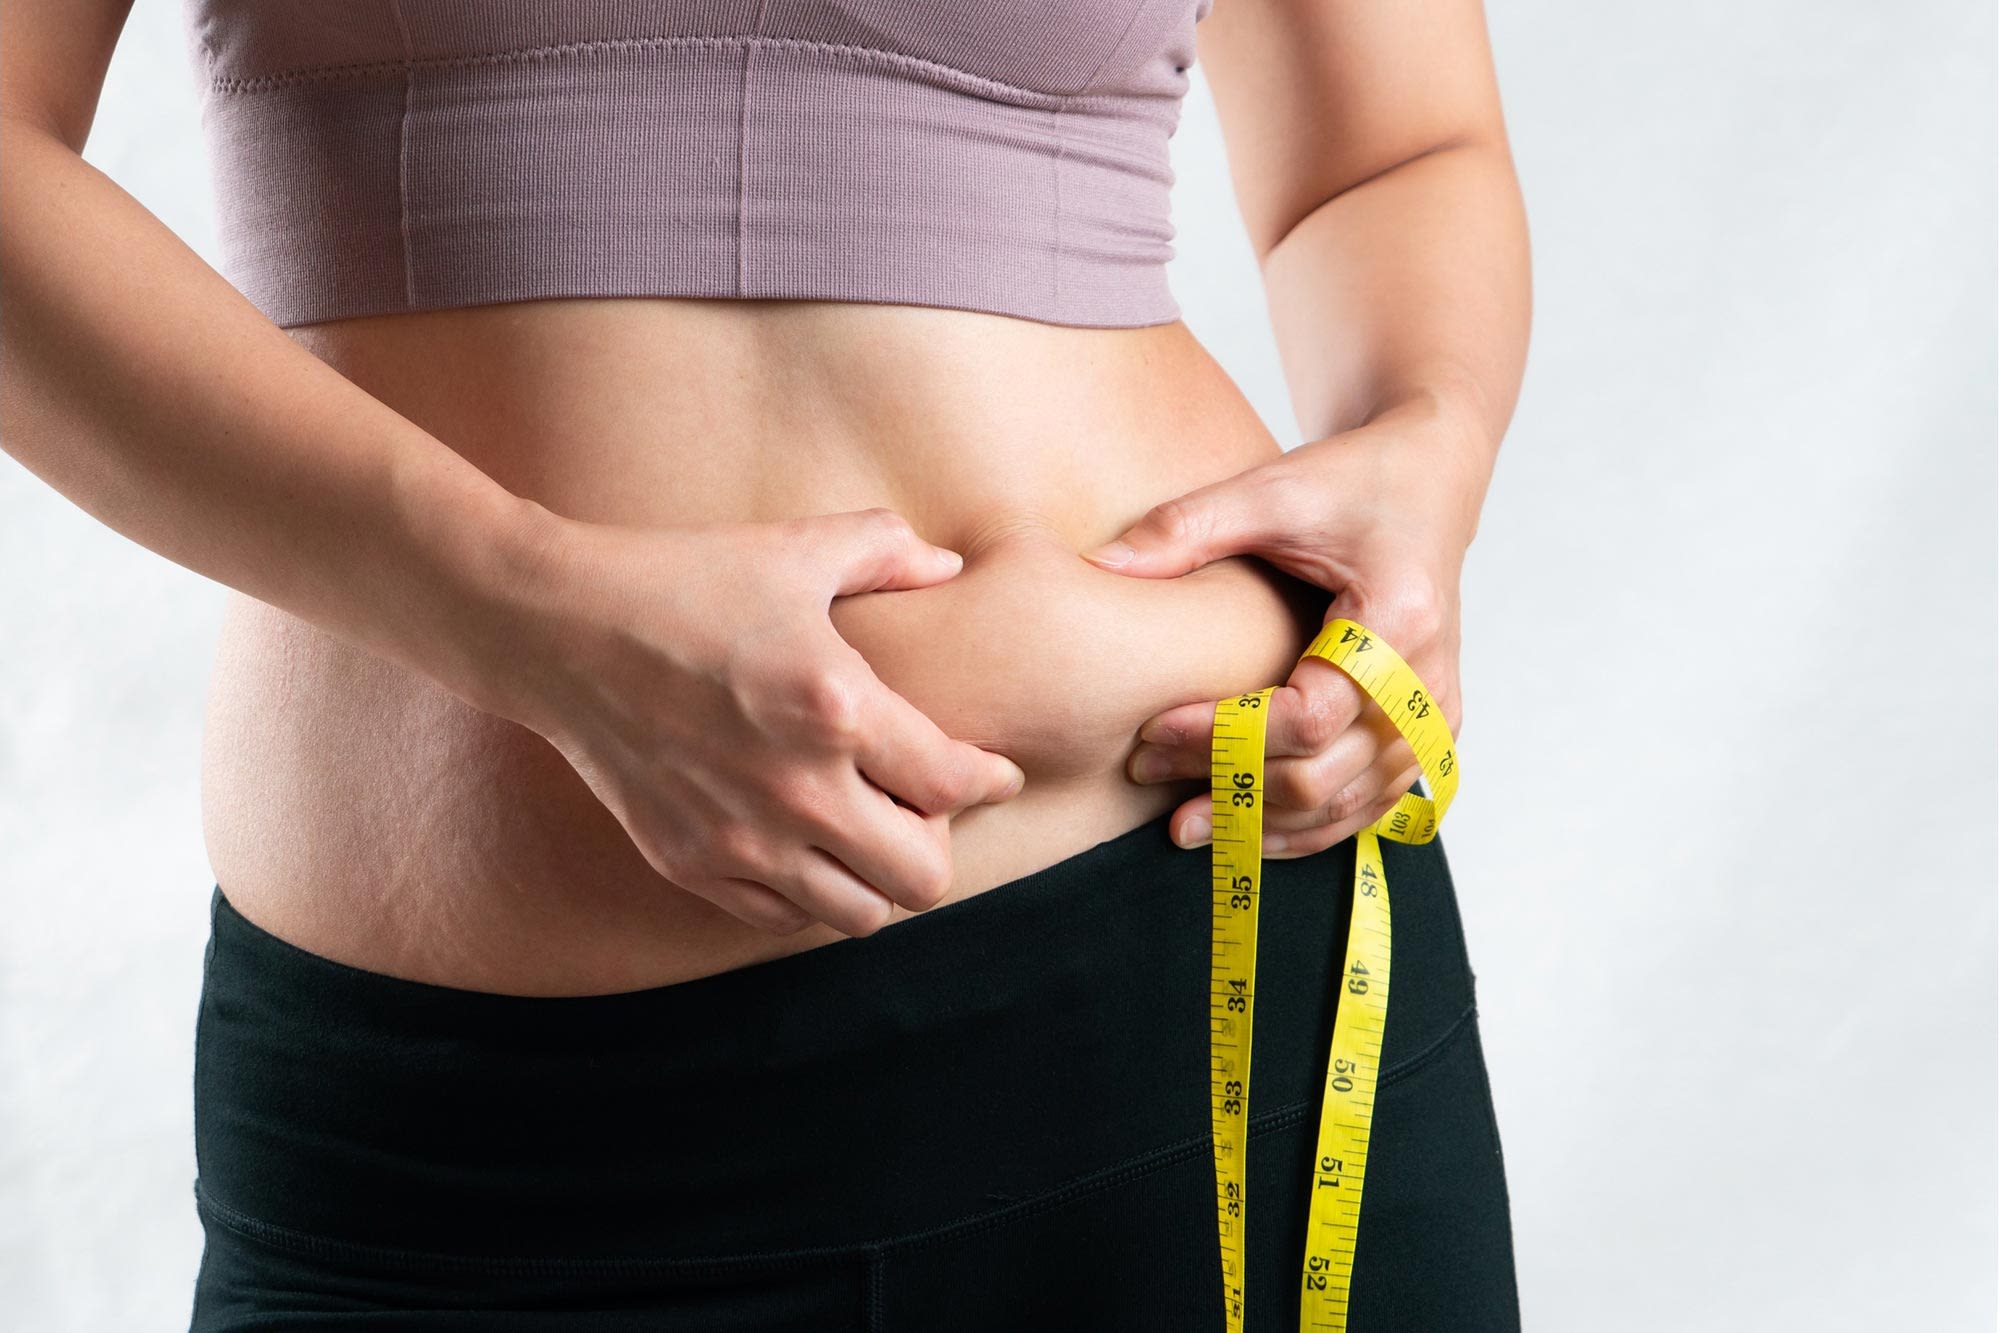 Revolutionary Weight Loss: Largest Ever Obesity Study Showcases Semaglutide’s Promise